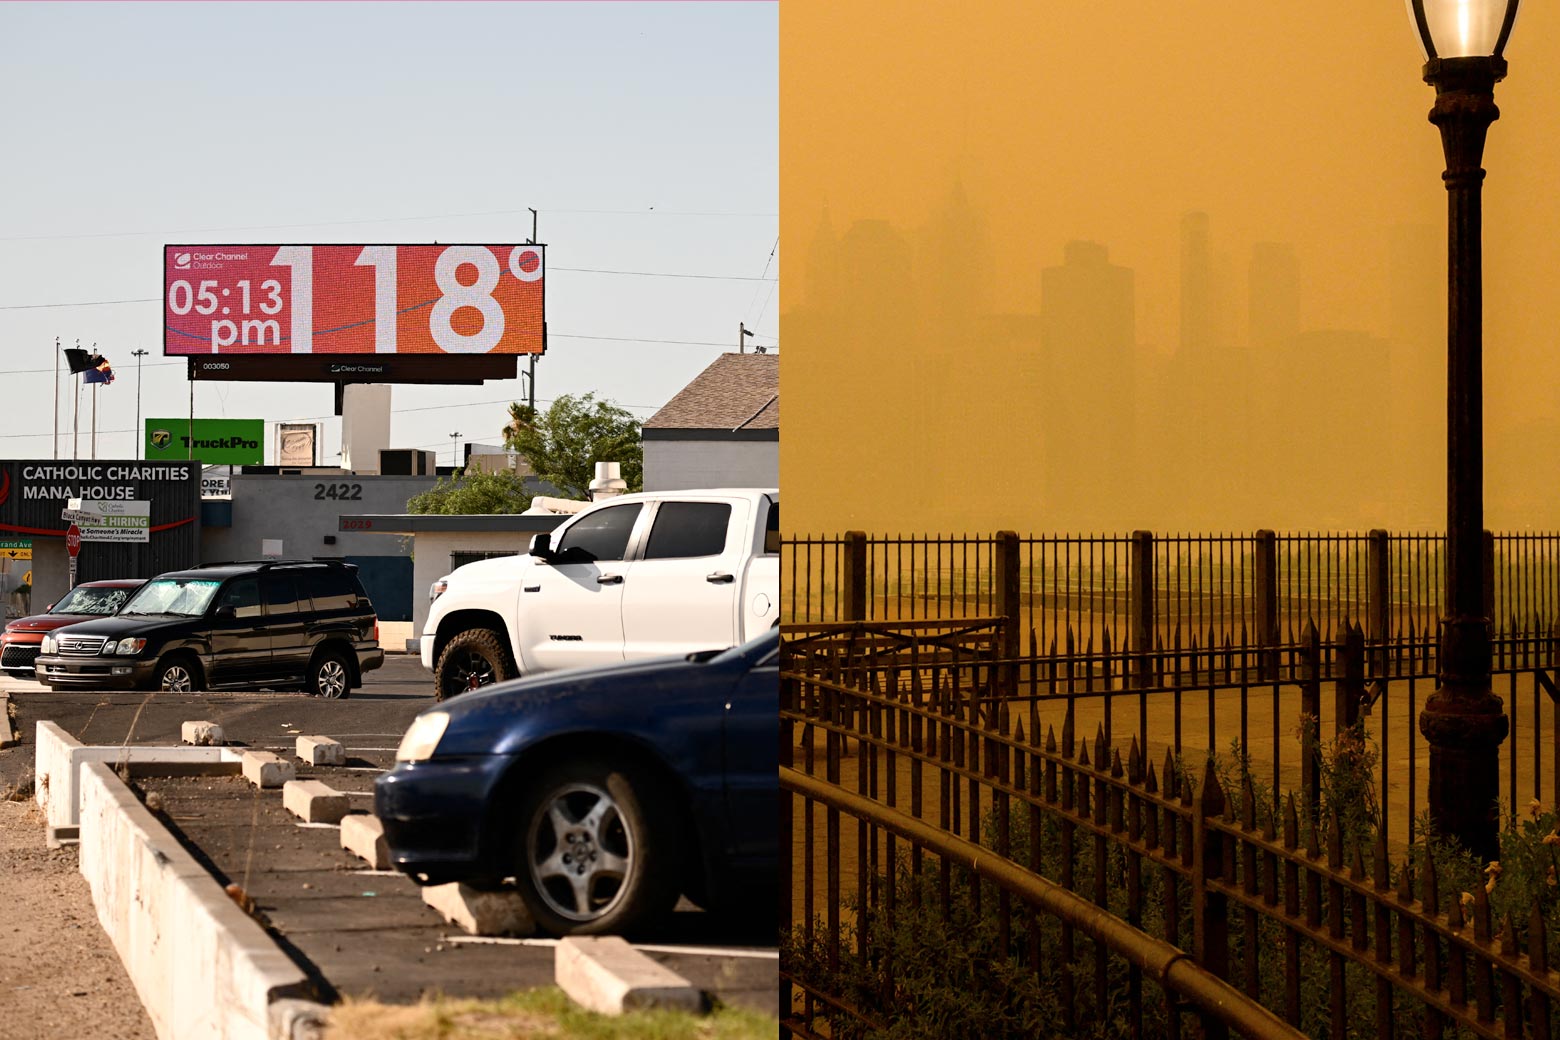 A collage of images from severe weather events includes an outdoor thermometer reading 118 degrees in Phoenix and thick wildfire smoke obscuring Manhattan.